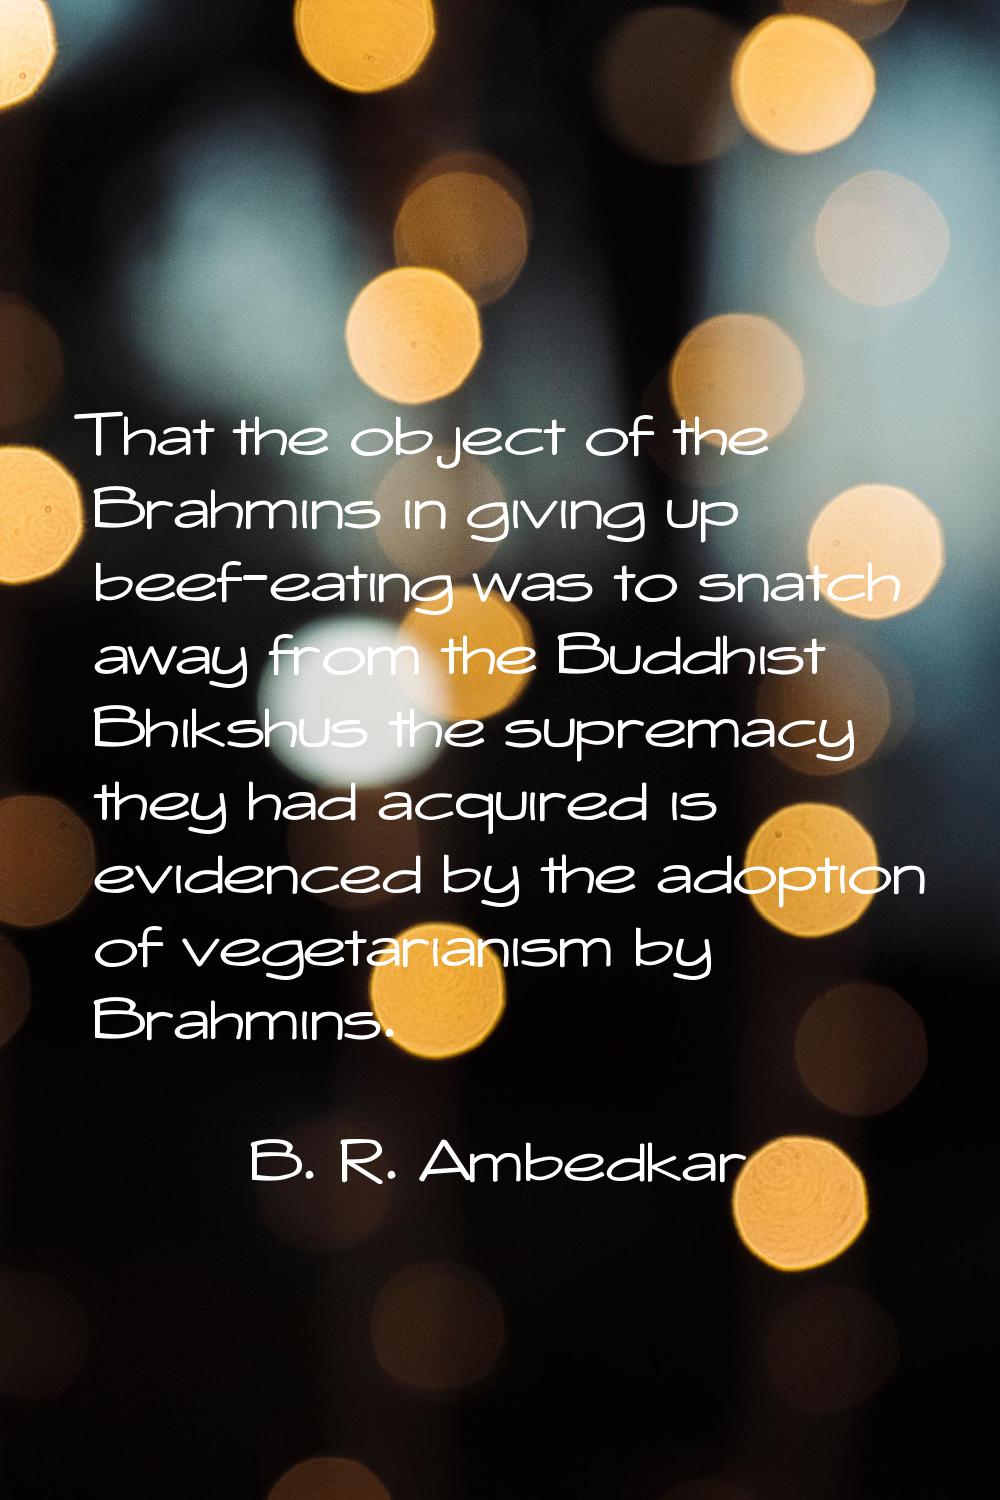 That the object of the Brahmins in giving up beef-eating was to snatch away from the Buddhist Bhiks